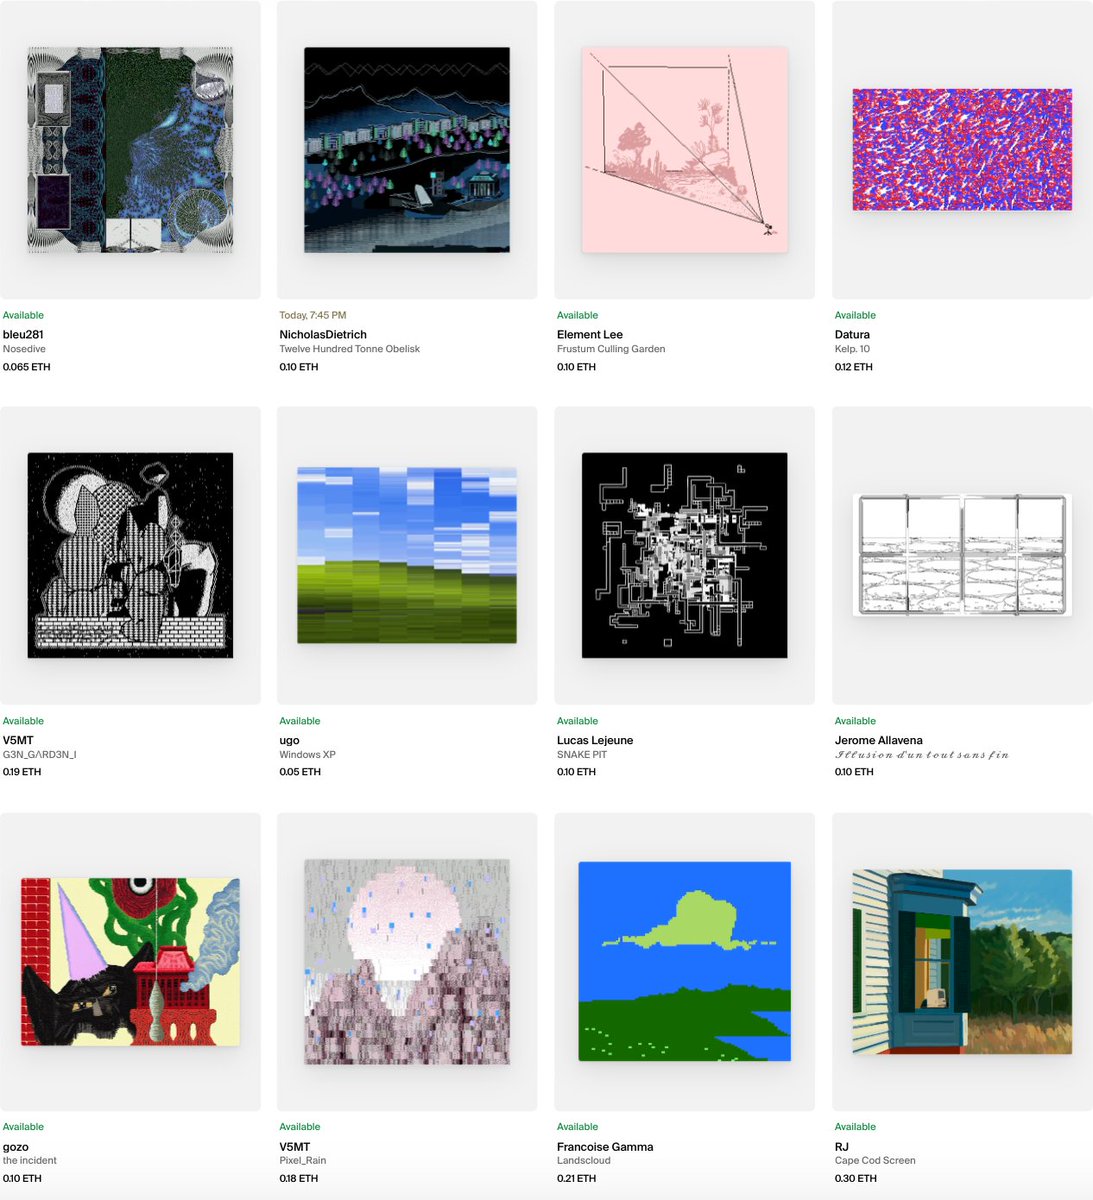 This @n3xtwave Pixel Lands drop is one I'm thrilled to be a part of. It provides a wide-ranging and very exciting answer to the question: what is a landscape today? I really recommend taking some time to take a look through the collection, and diving into the worlds created 🙏🙏